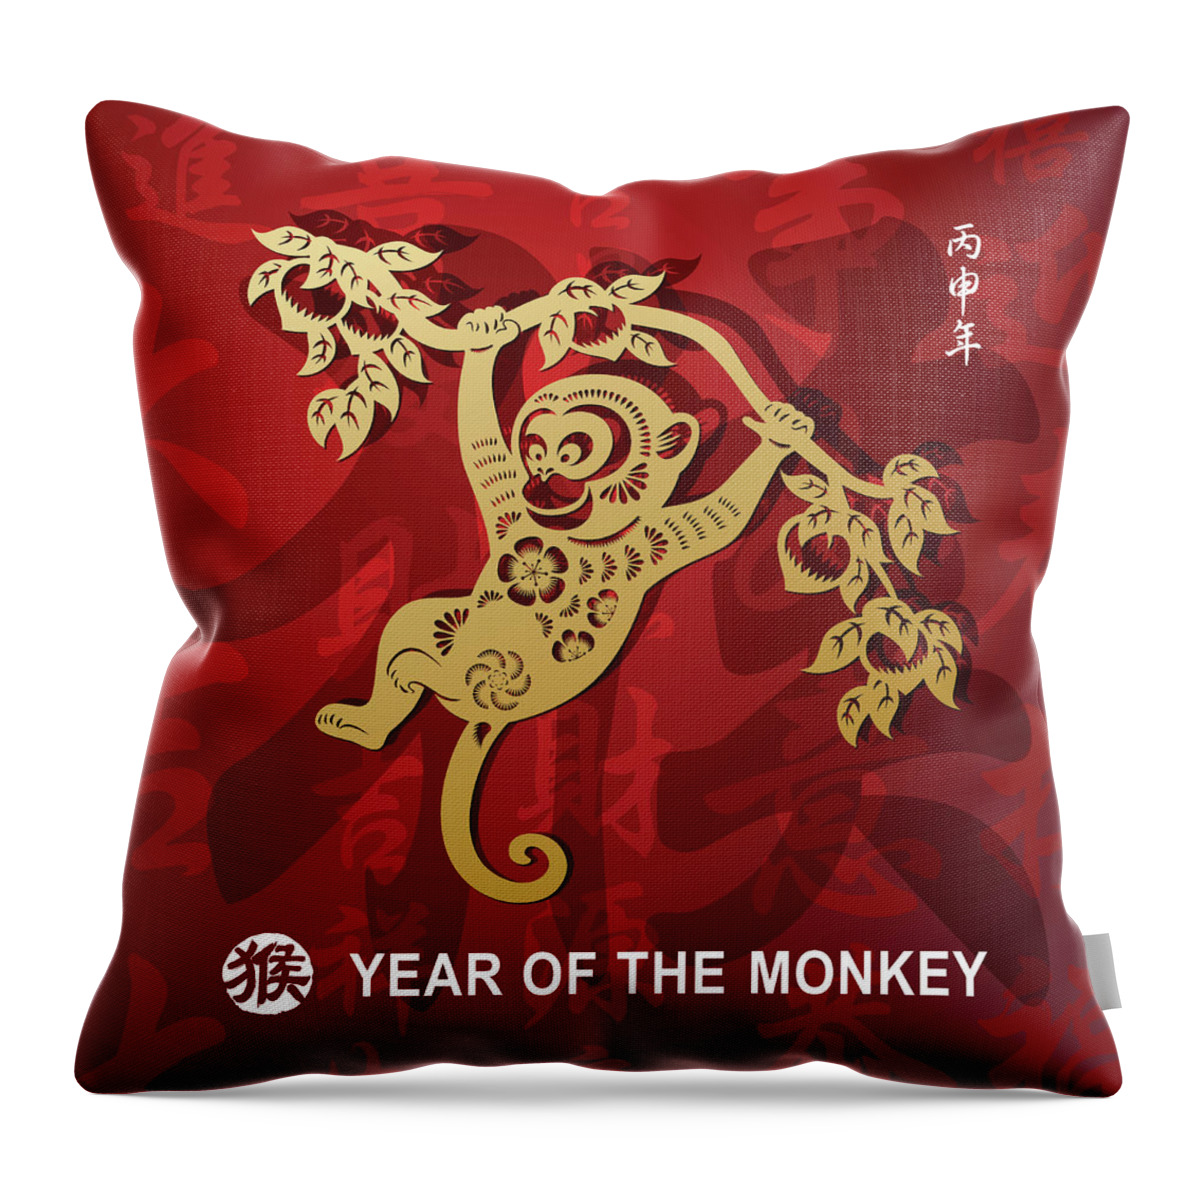 Chinese Culture Throw Pillow featuring the digital art Golden Papercut Art Monkey In Red by Exxorian